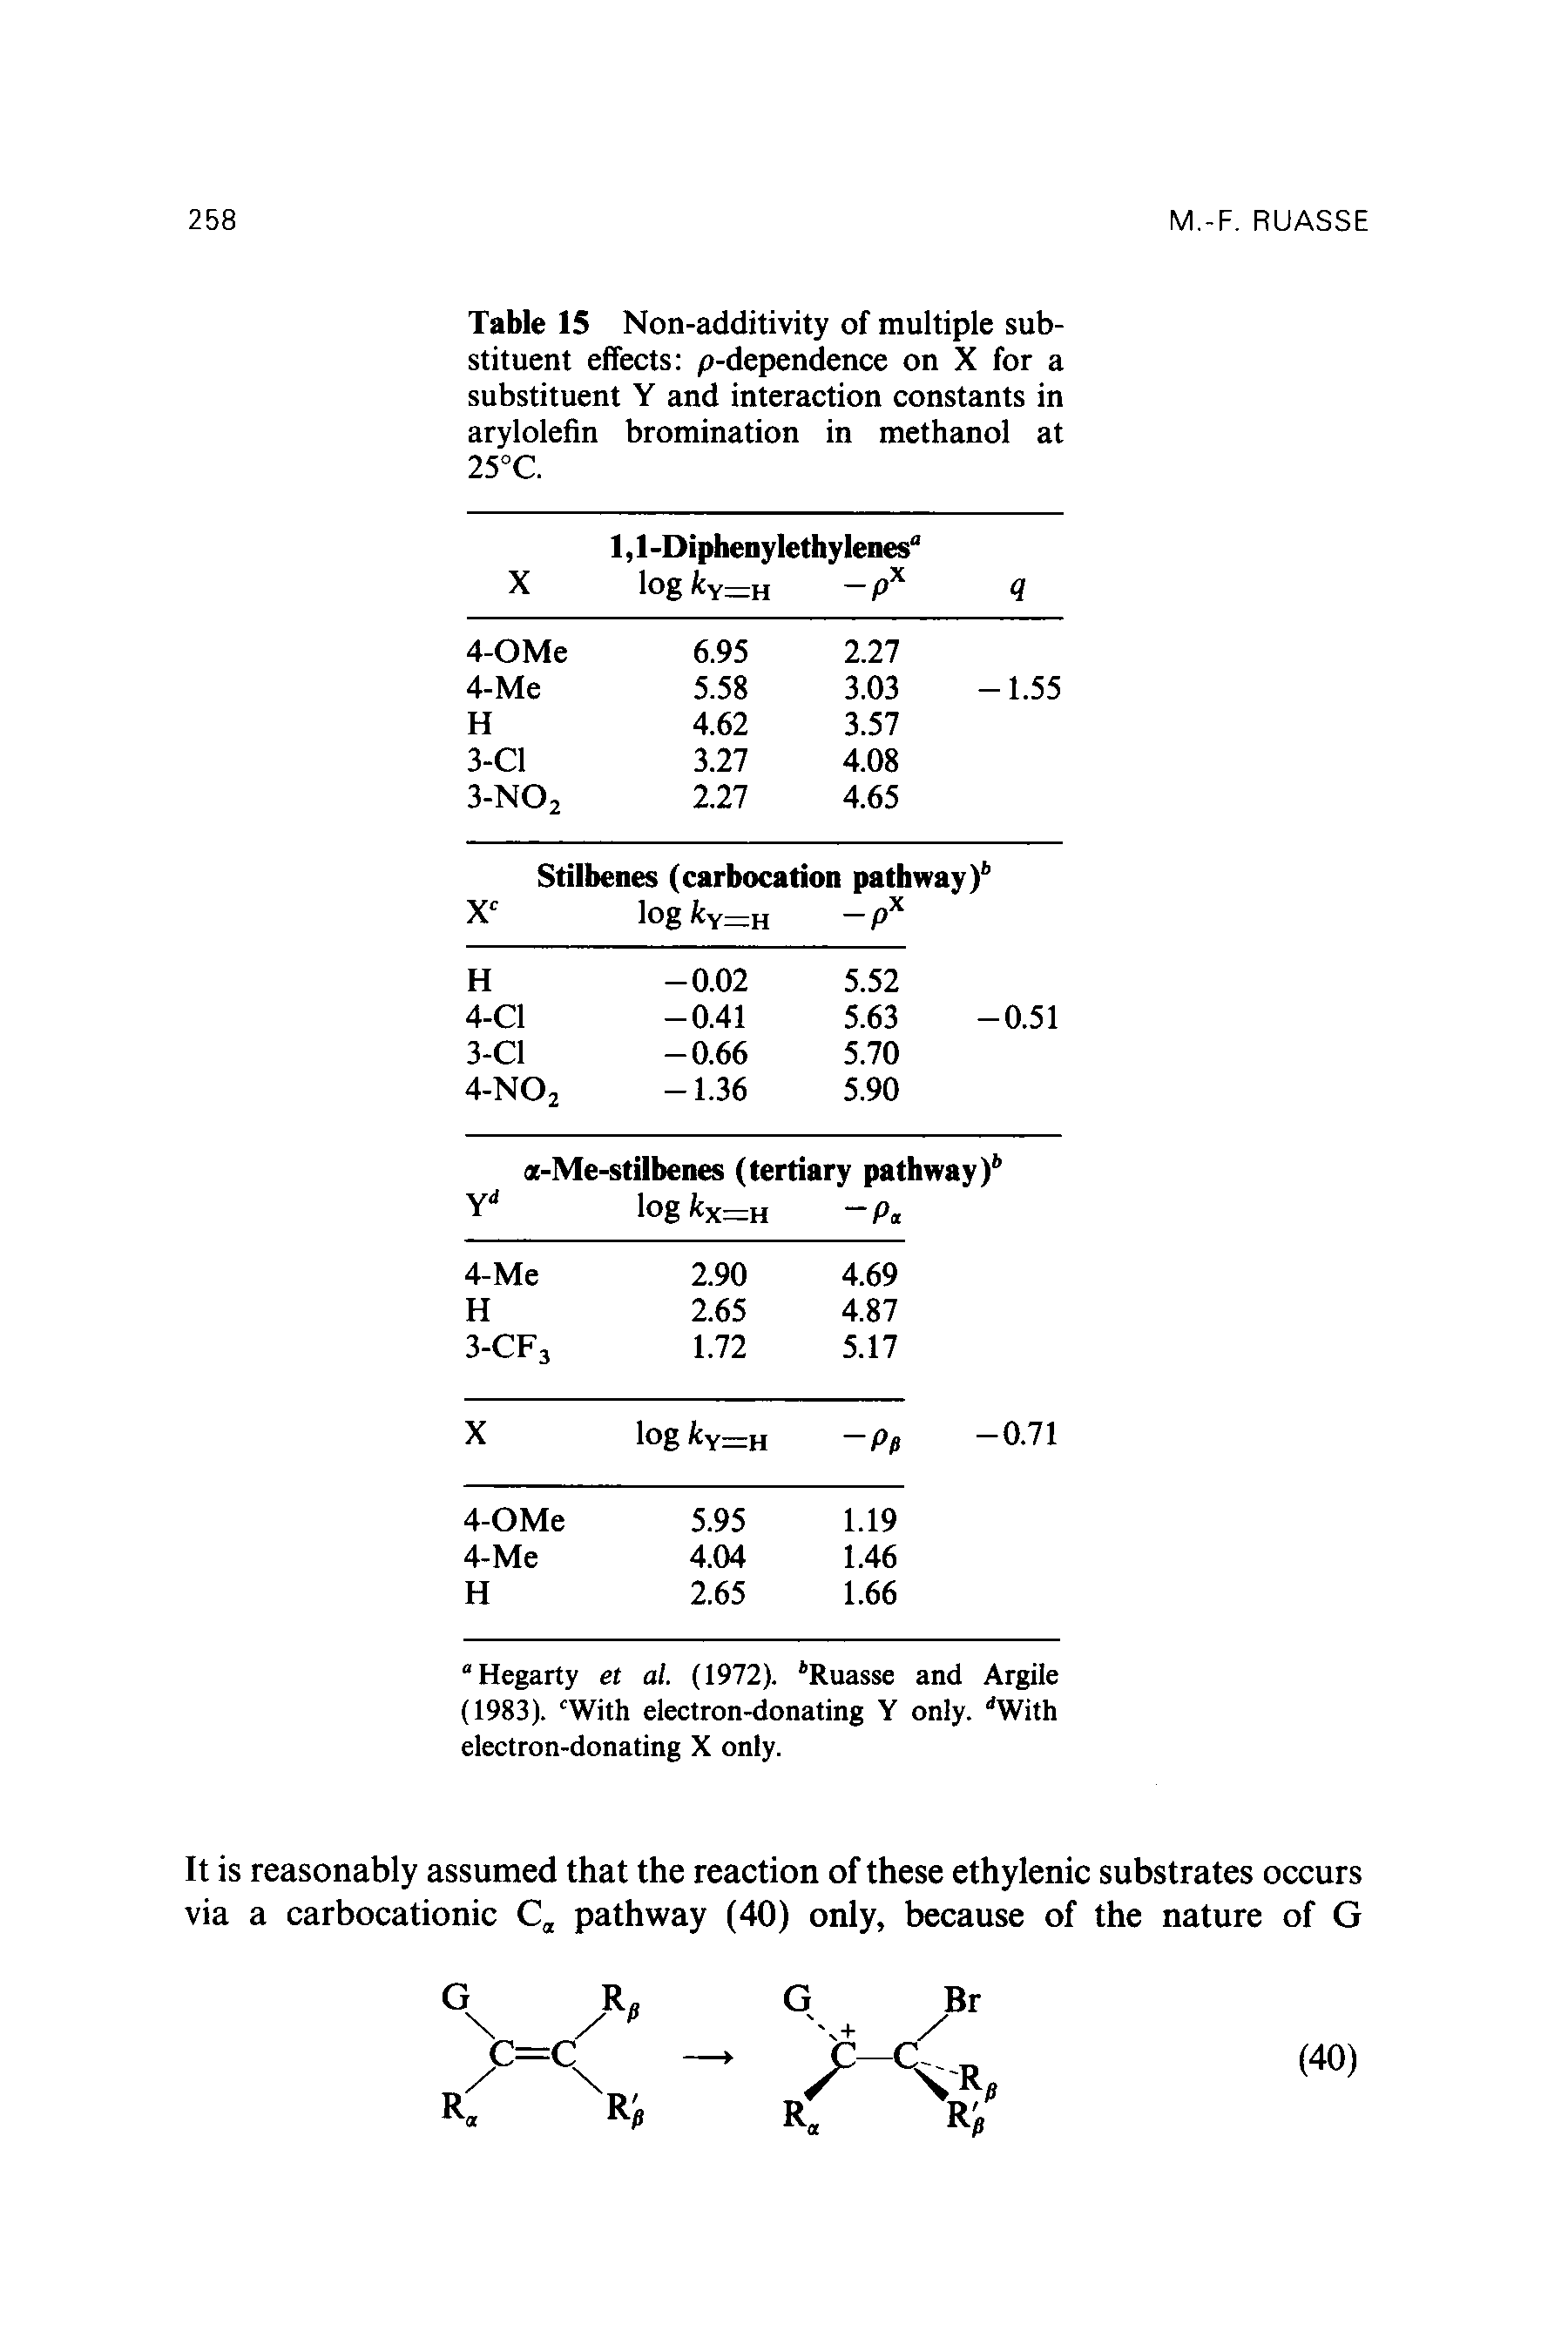 Table 15 Non-additivity of multiple substituent effects p-dependence on X for a substituent Y and interaction constants in arylolefin bromination in methanol at 25°C.